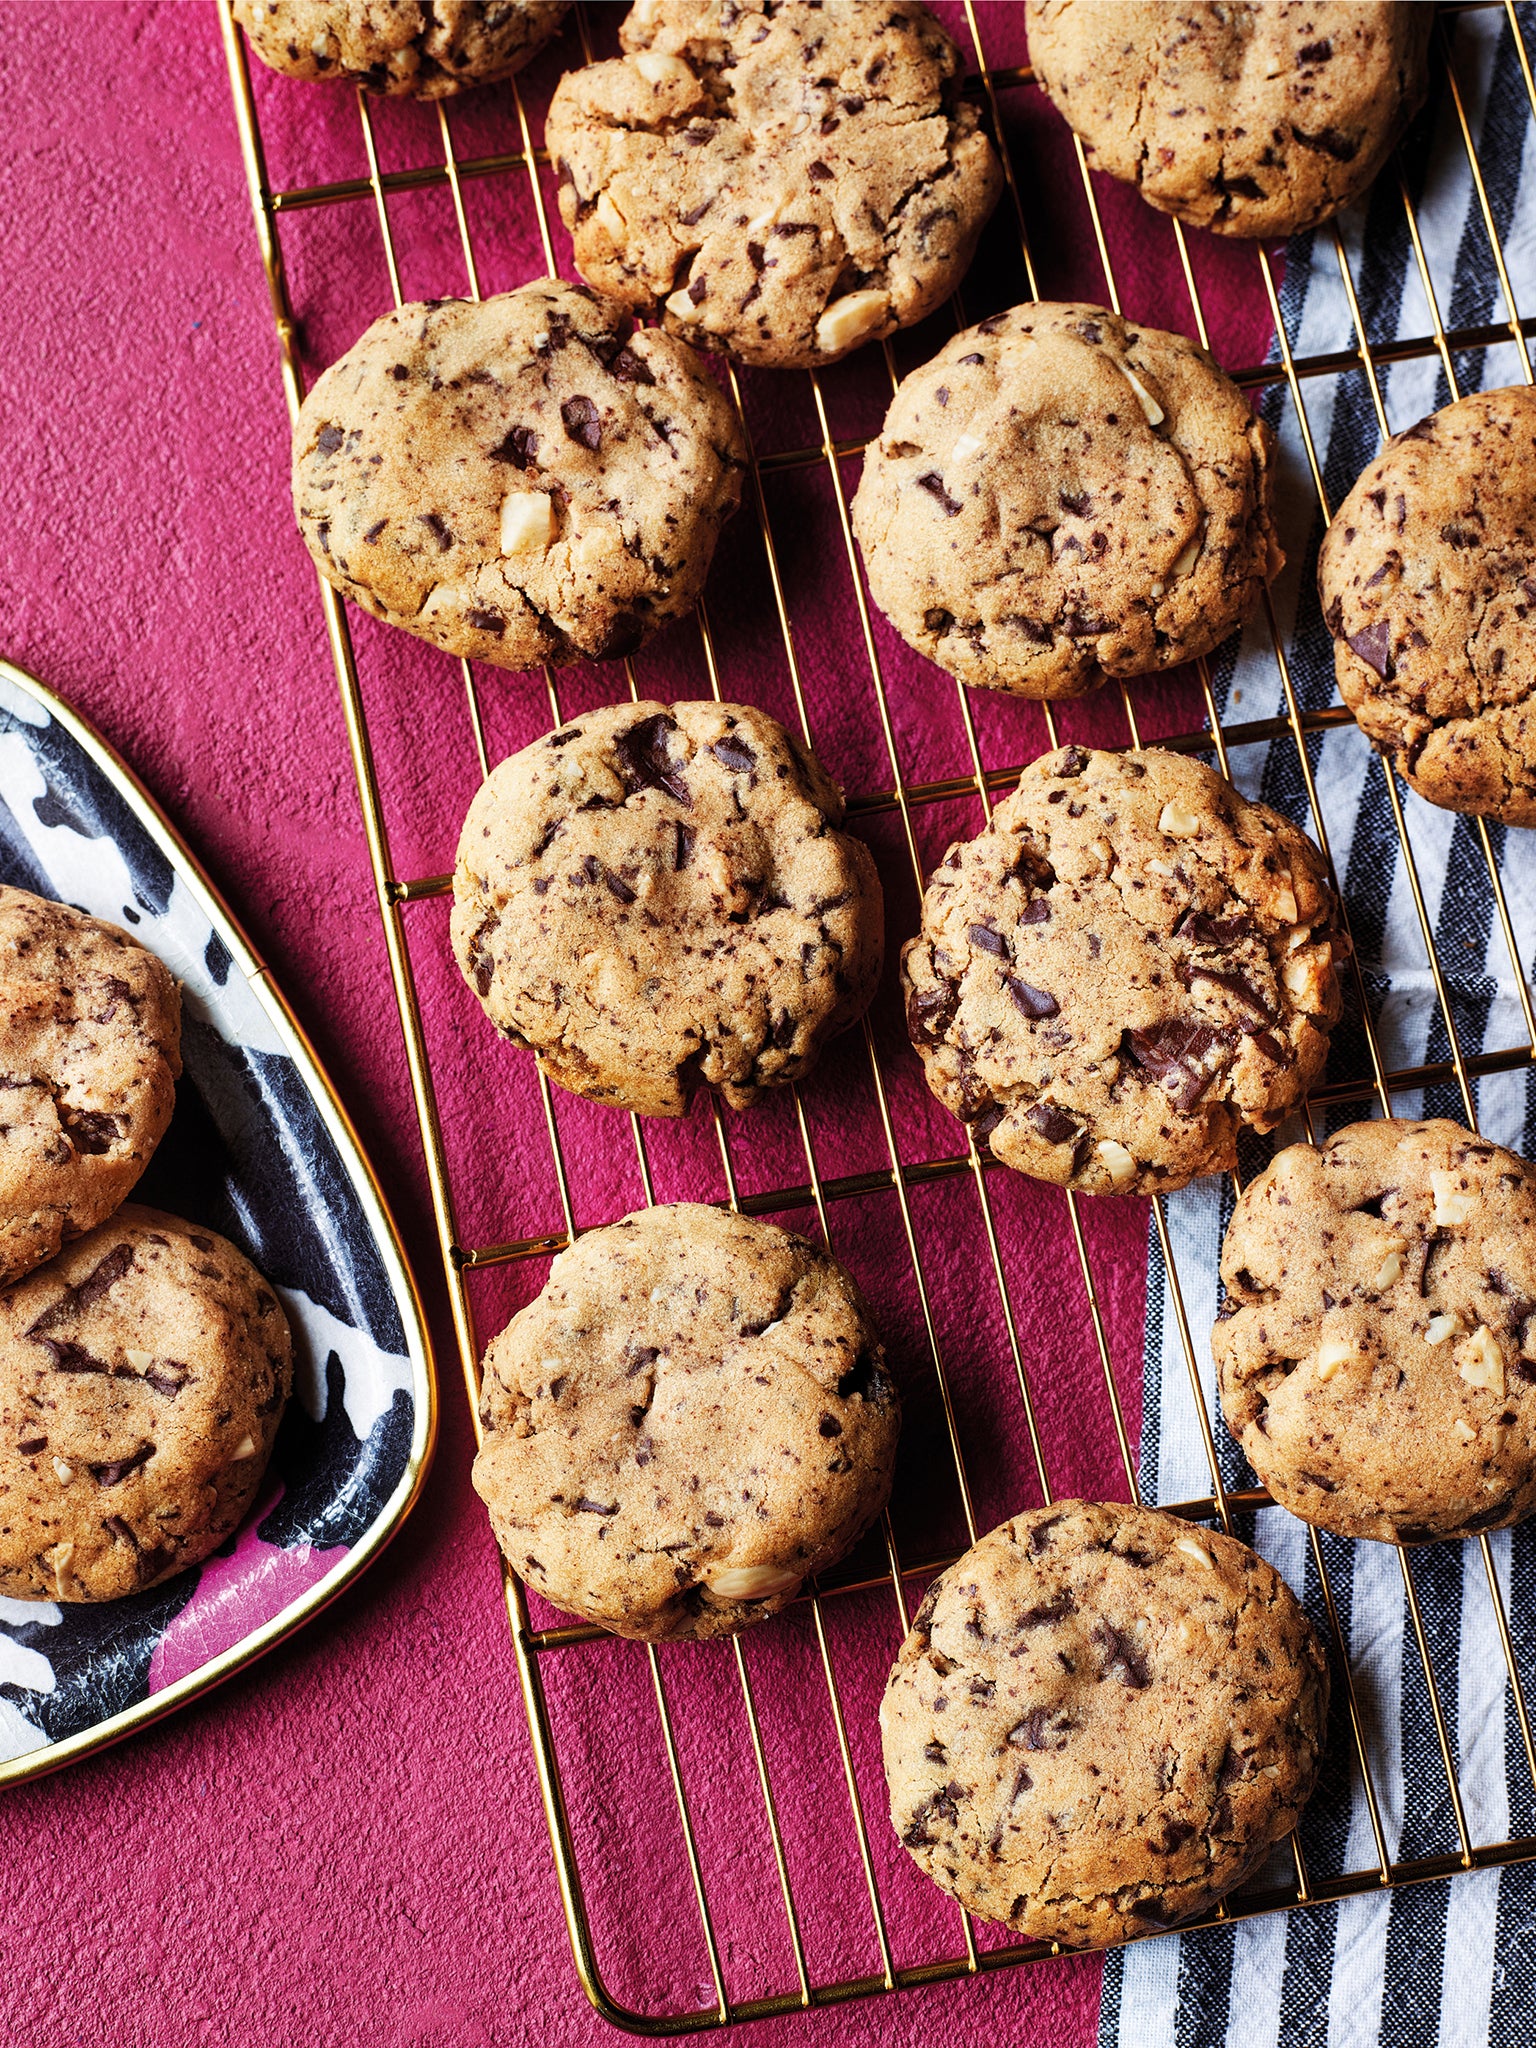 With dark chocolate chunks, these deliciously nutty cookies are a sophisticated sweet treat